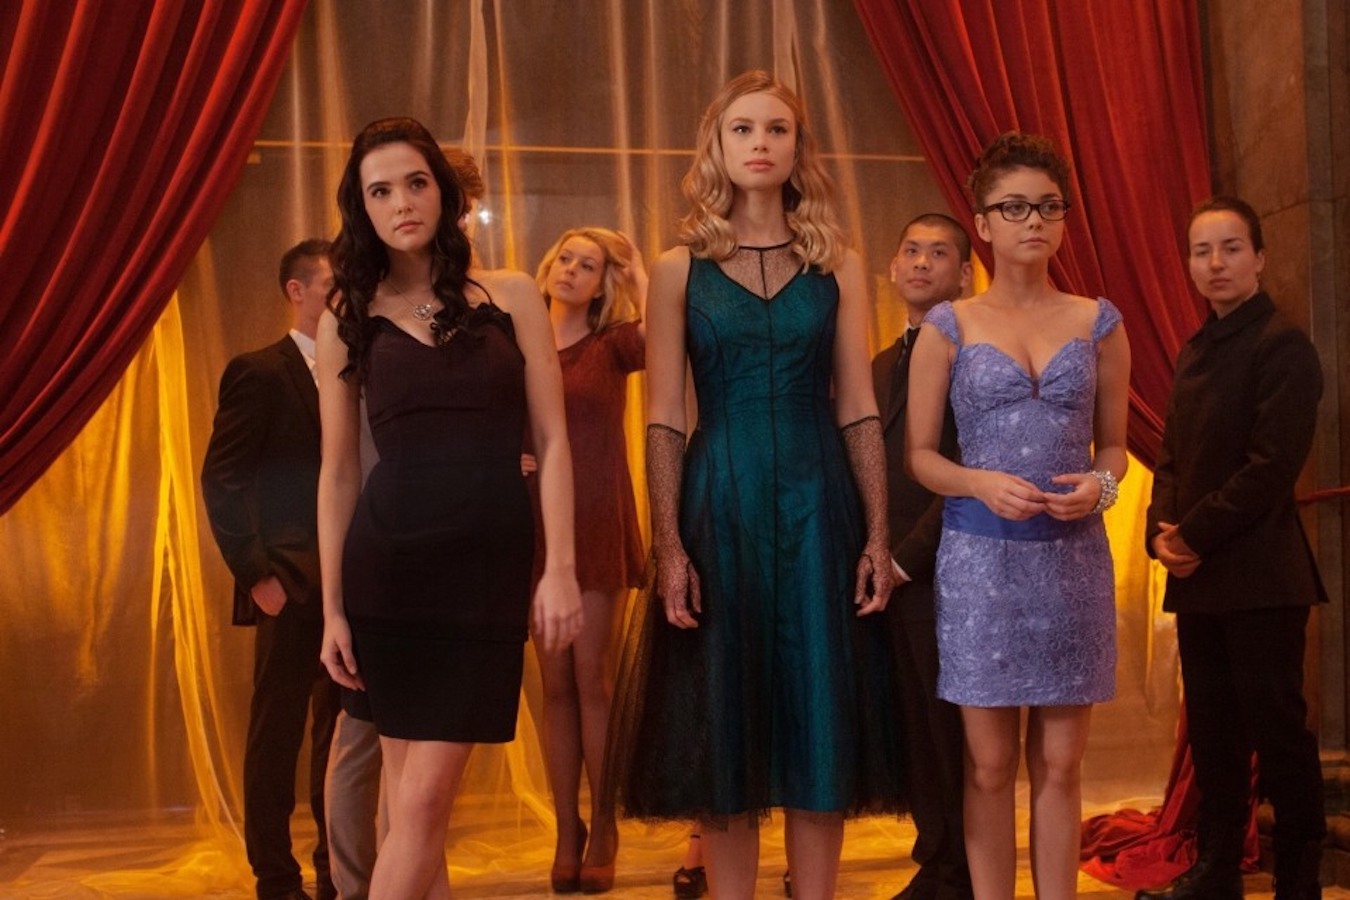 Students stand near the curtained entrance to an elegant school dance. A tall, blonde, white woman stands with her arms at her sides; she is wearing an emerald-green dress and fishnet gloves. Flanking her are two shorter, brunette women. One strikes a poised pose; the other stands awkwardly.